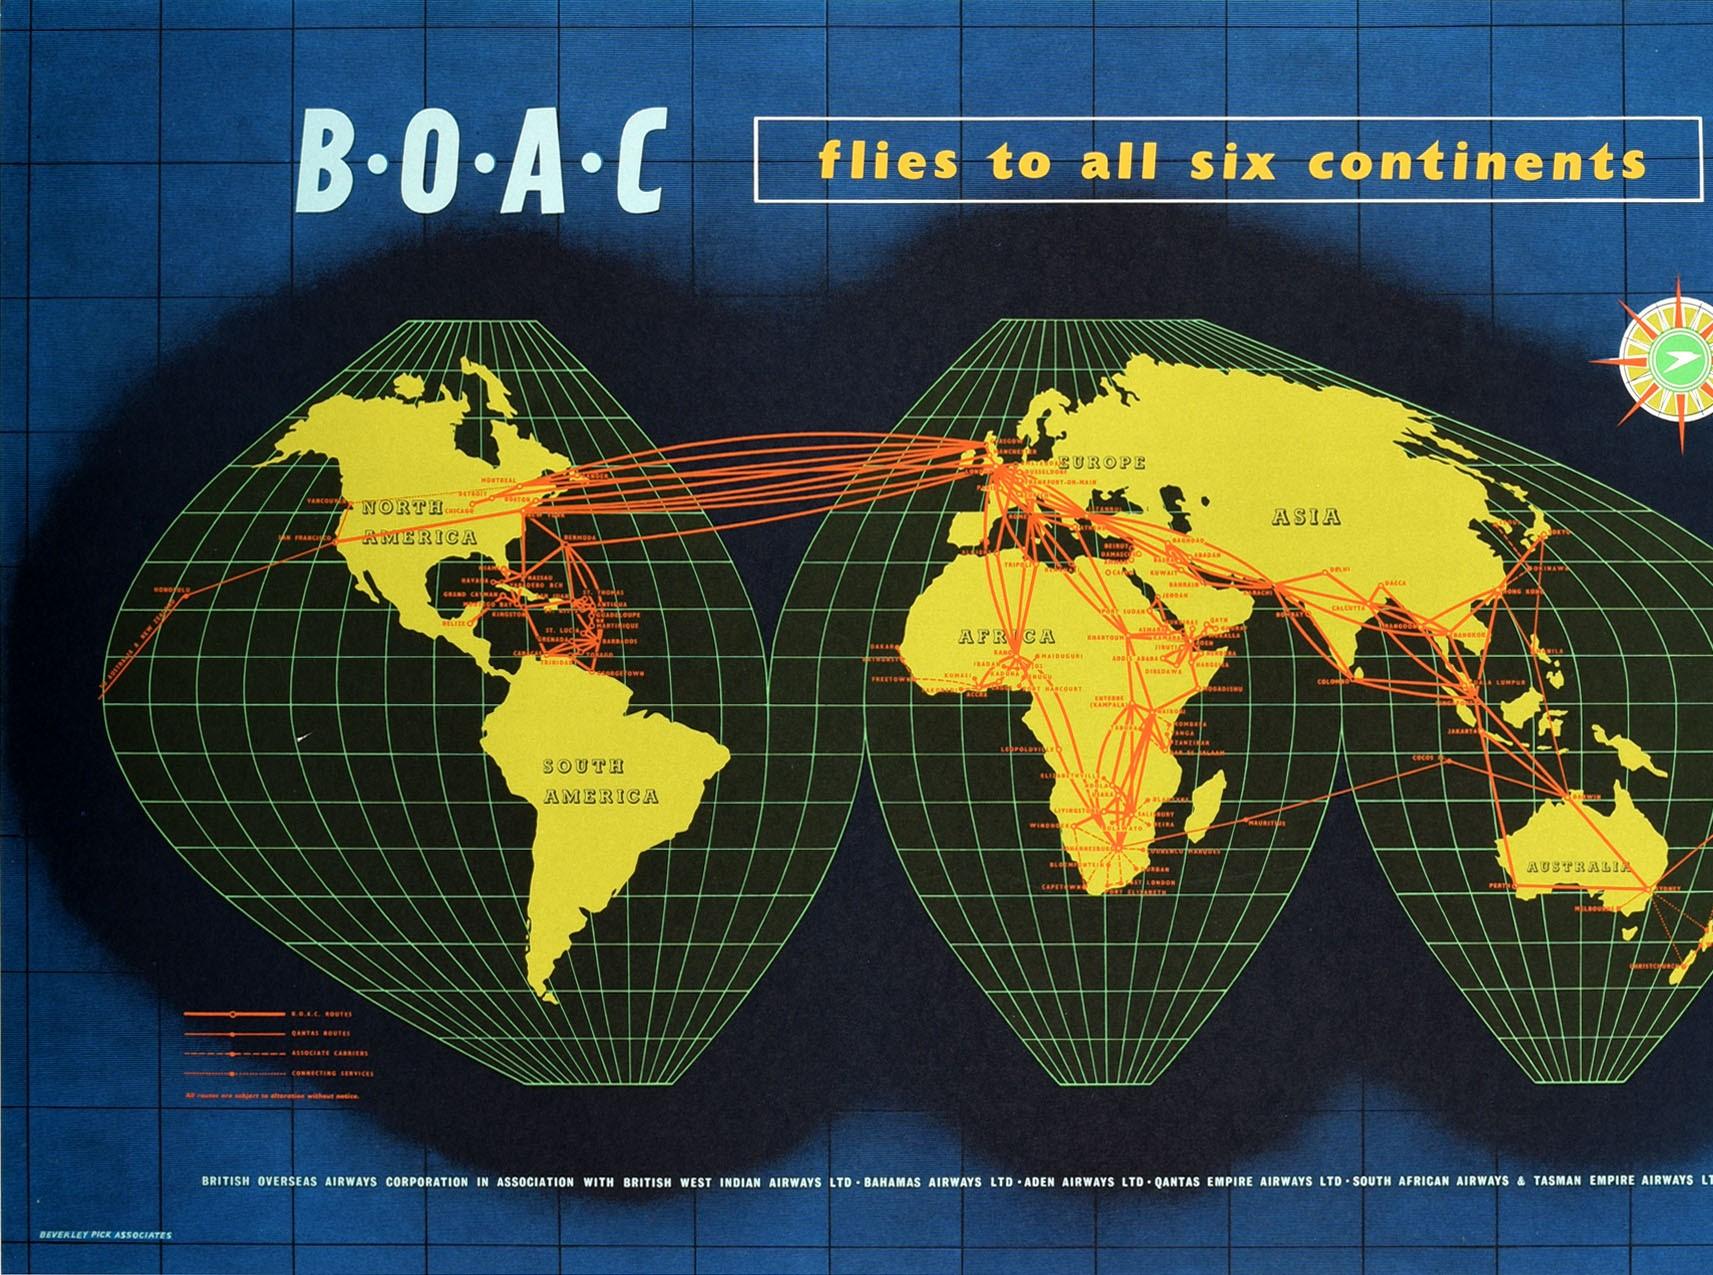 Original Vintage Travel Poster BOAC Flies To All Six Continents Planisphere Map - Print by Unknown